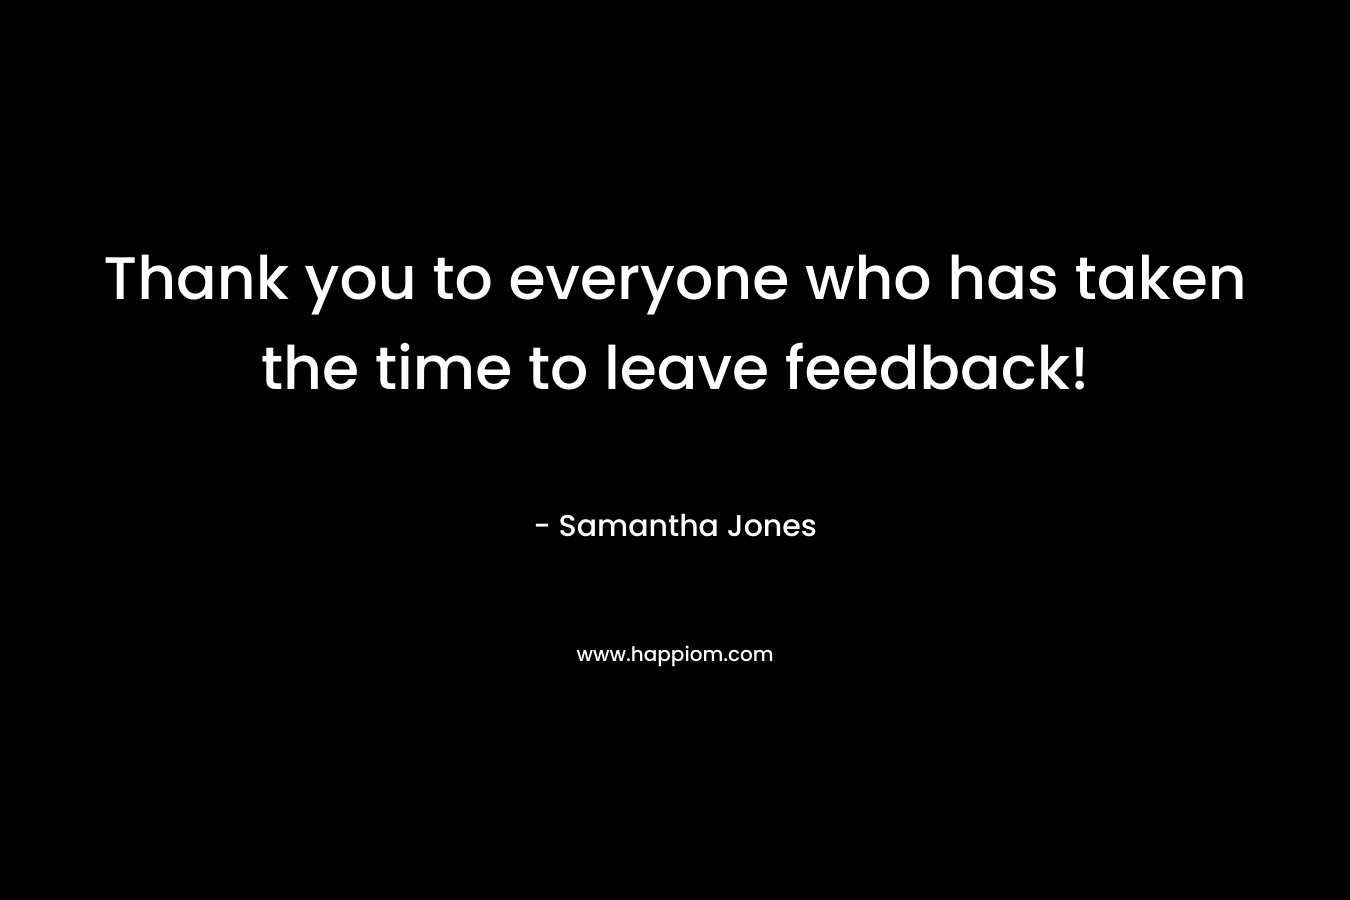 Thank you to everyone who has taken the time to leave feedback!